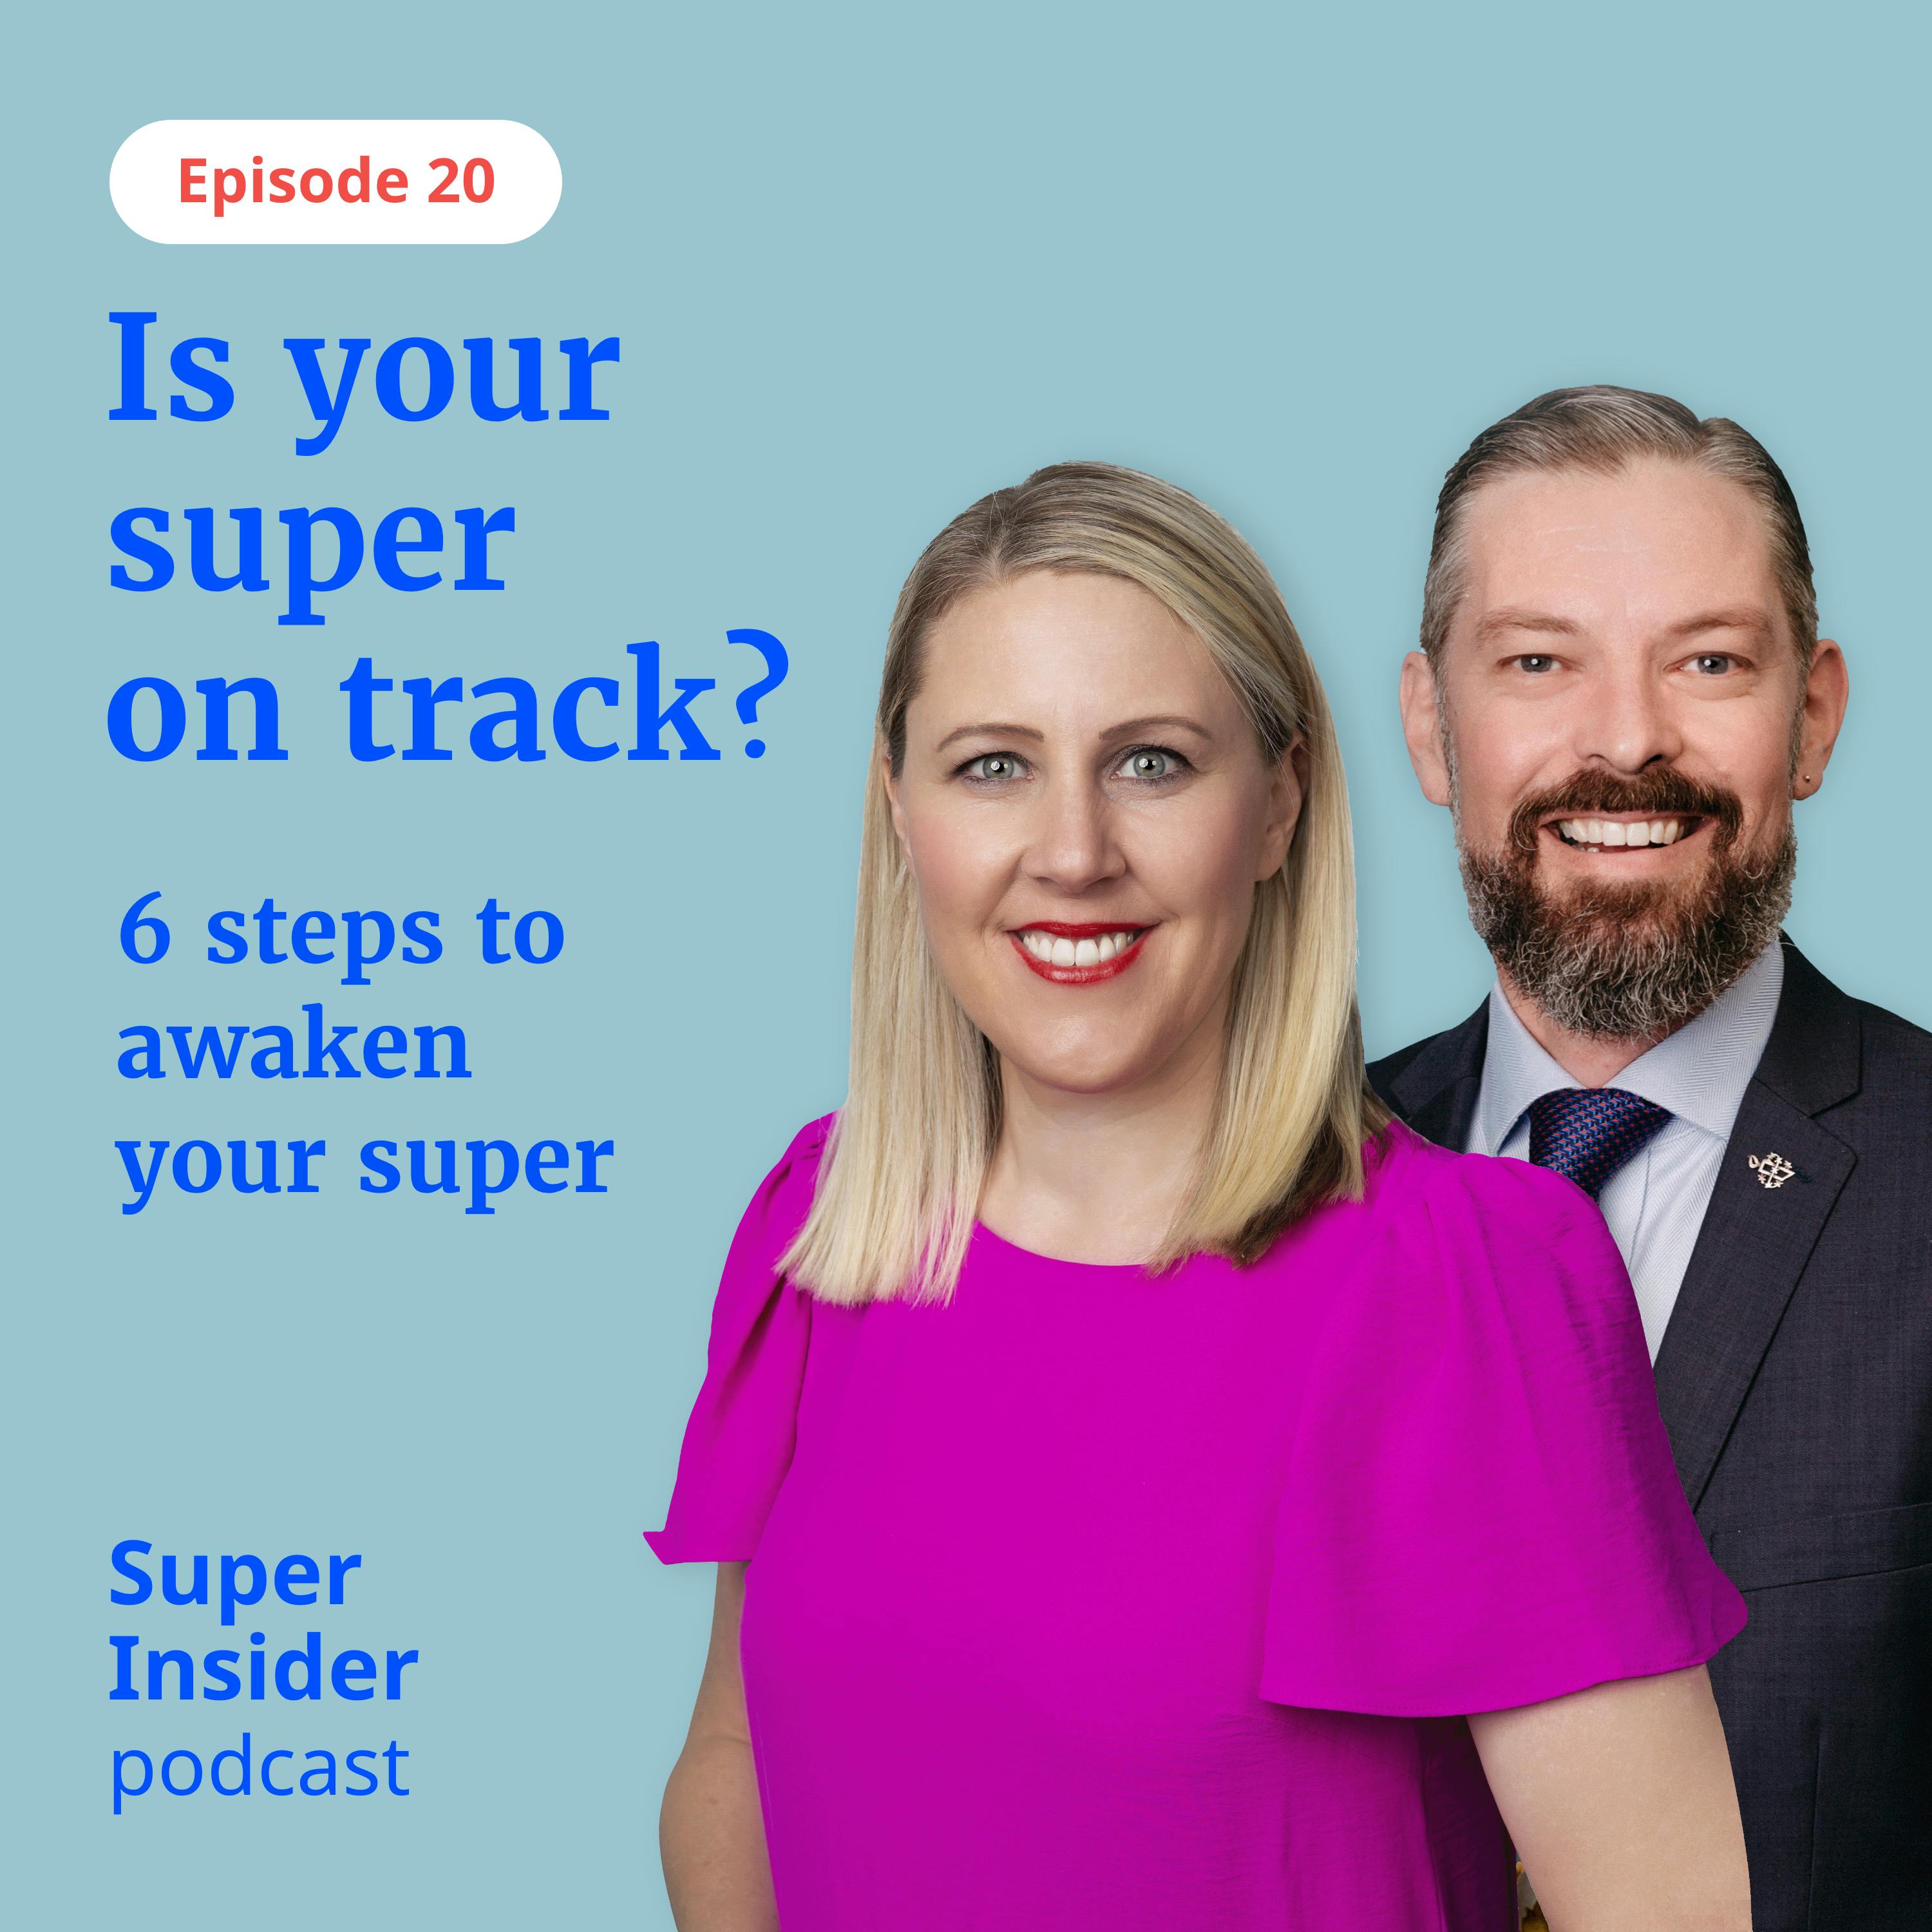 Is your superannuation on track? 6 steps to awaken your super